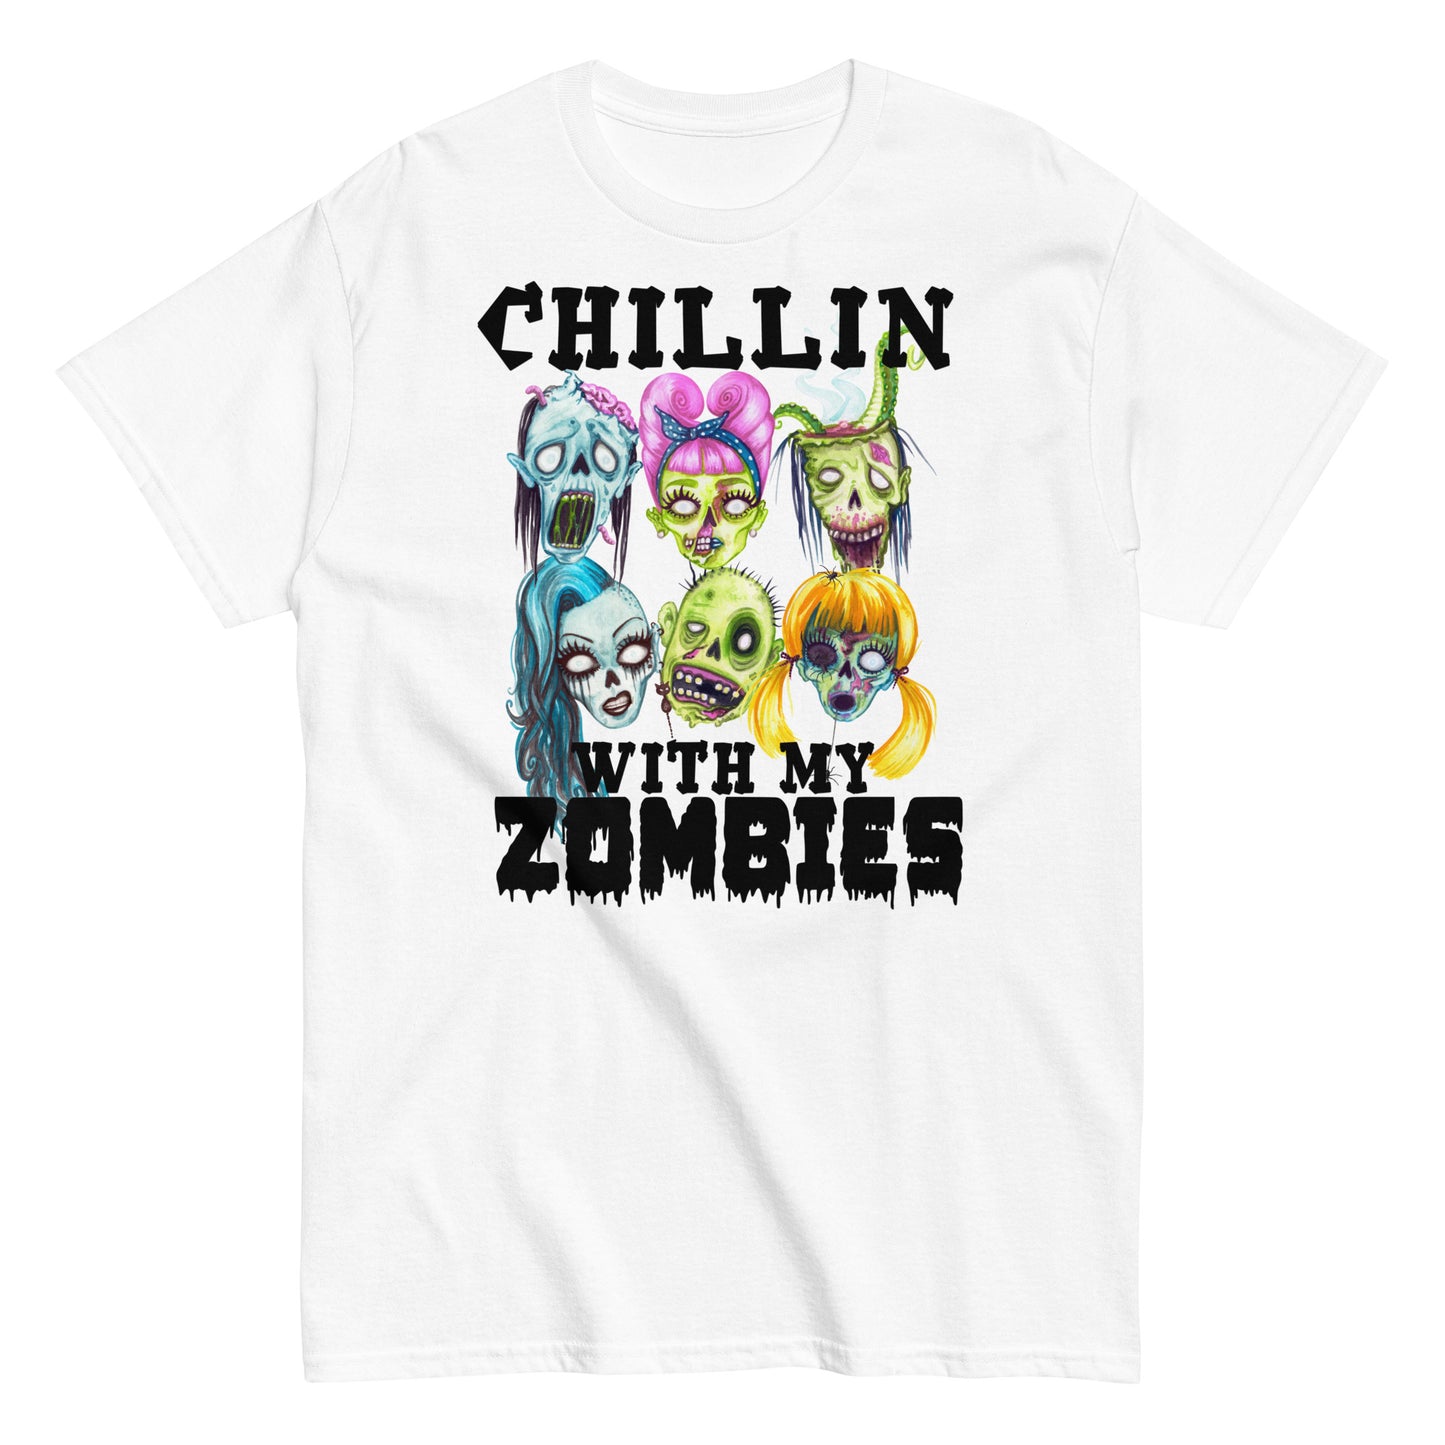 Chillin' with My Zombies: Halloween Soft Tee